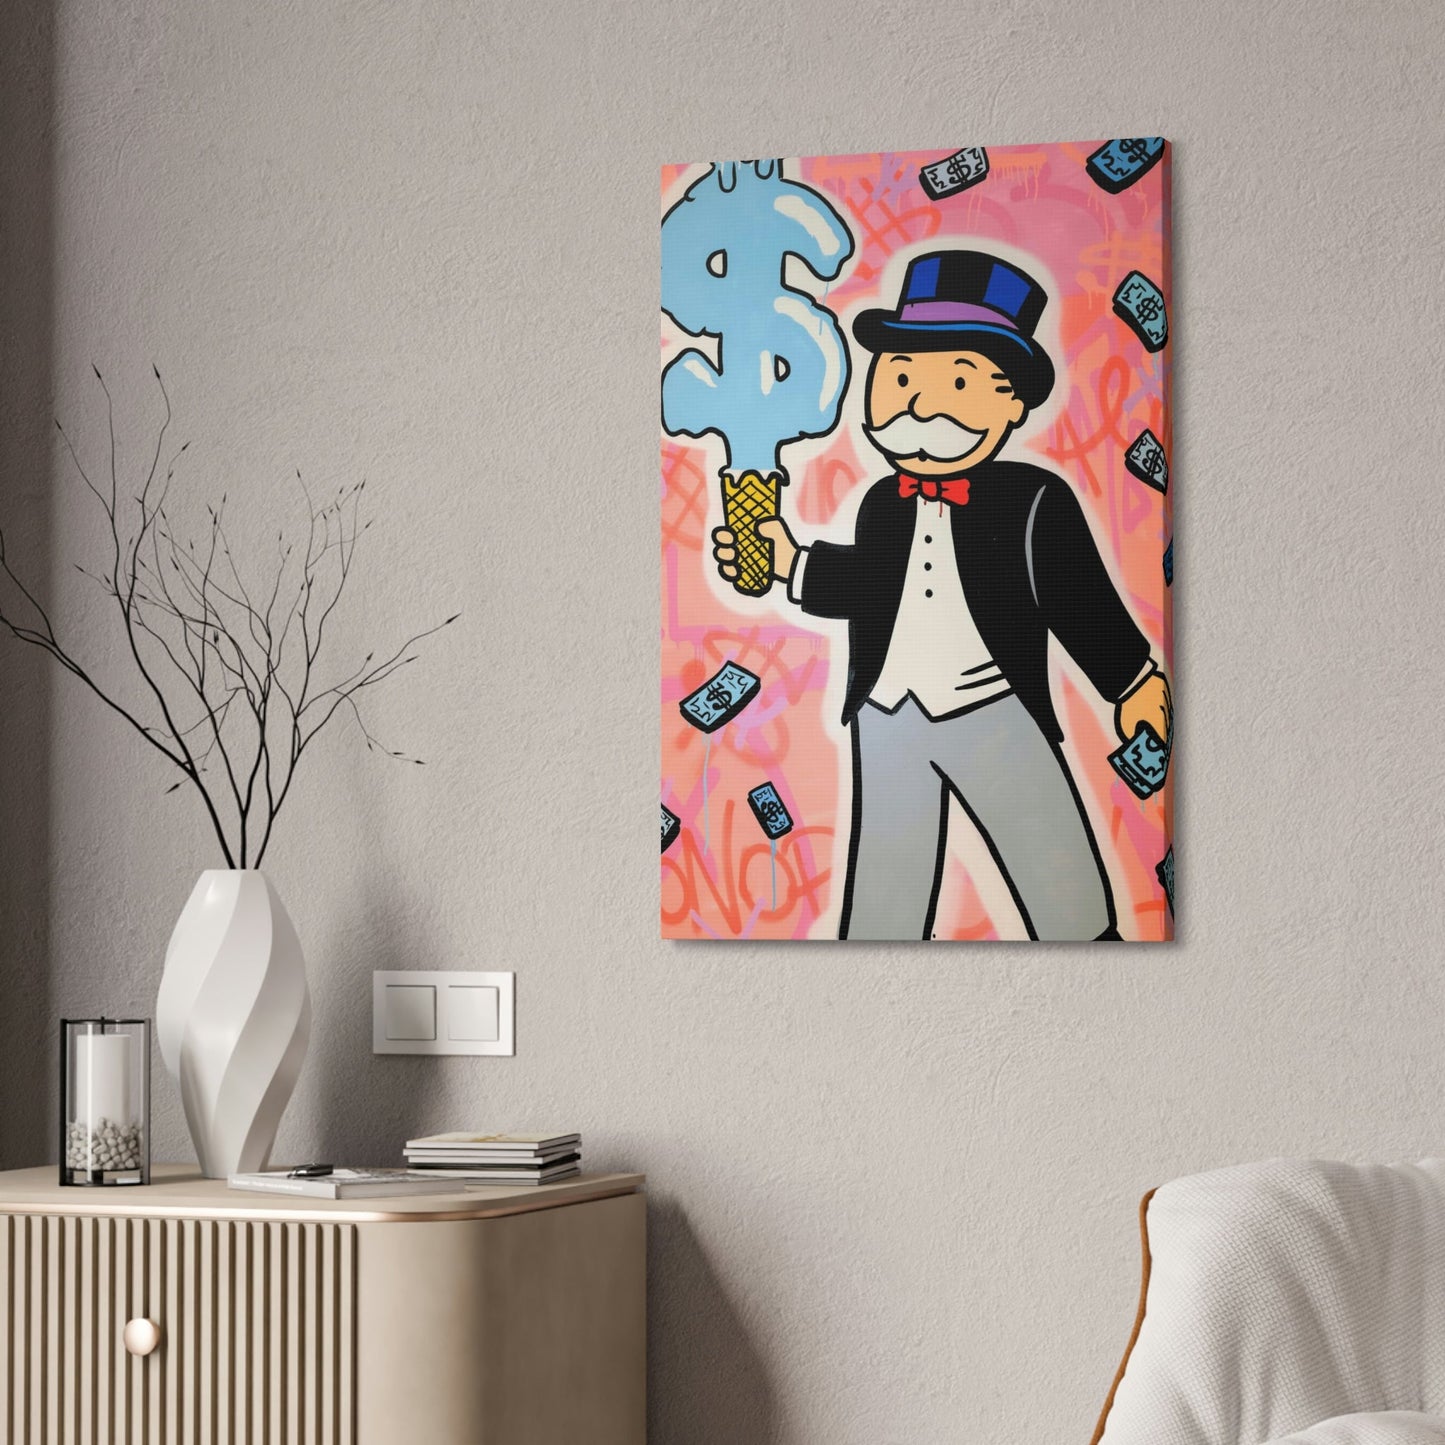 Money and Art Collide: Framed Canvas and Poster Print of Alec Monopoly's Iconic Work